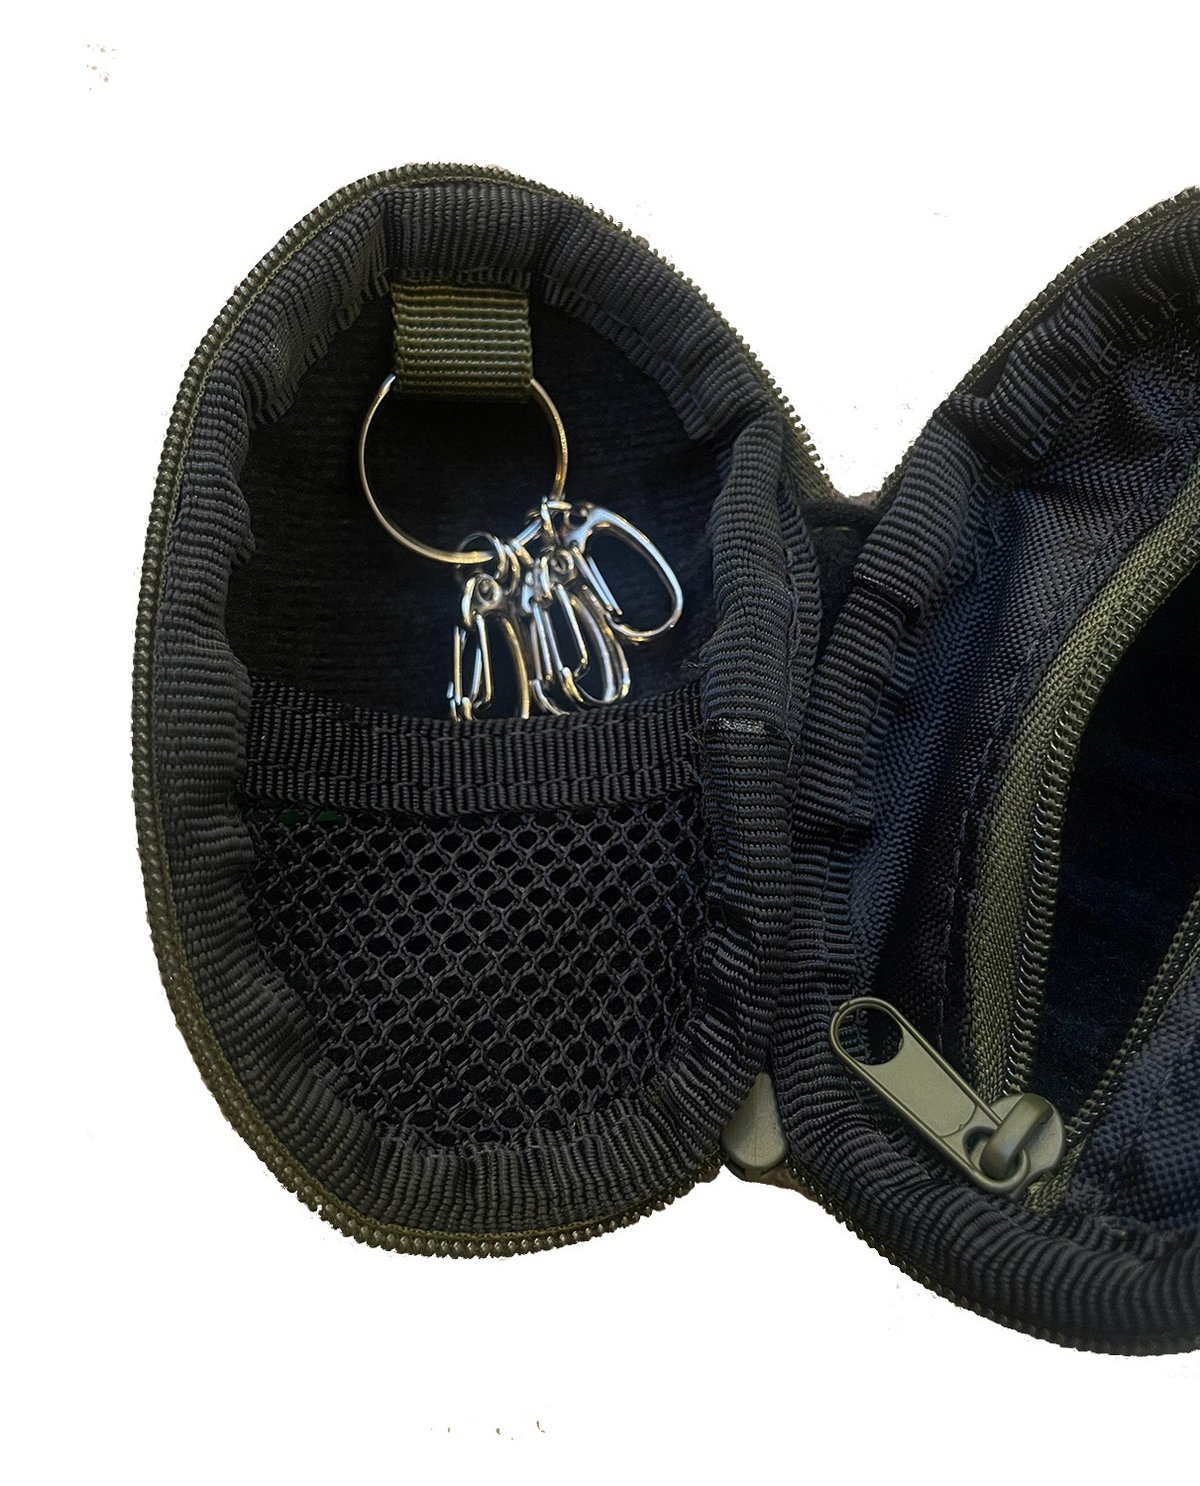 Image of Grenade Pouch 